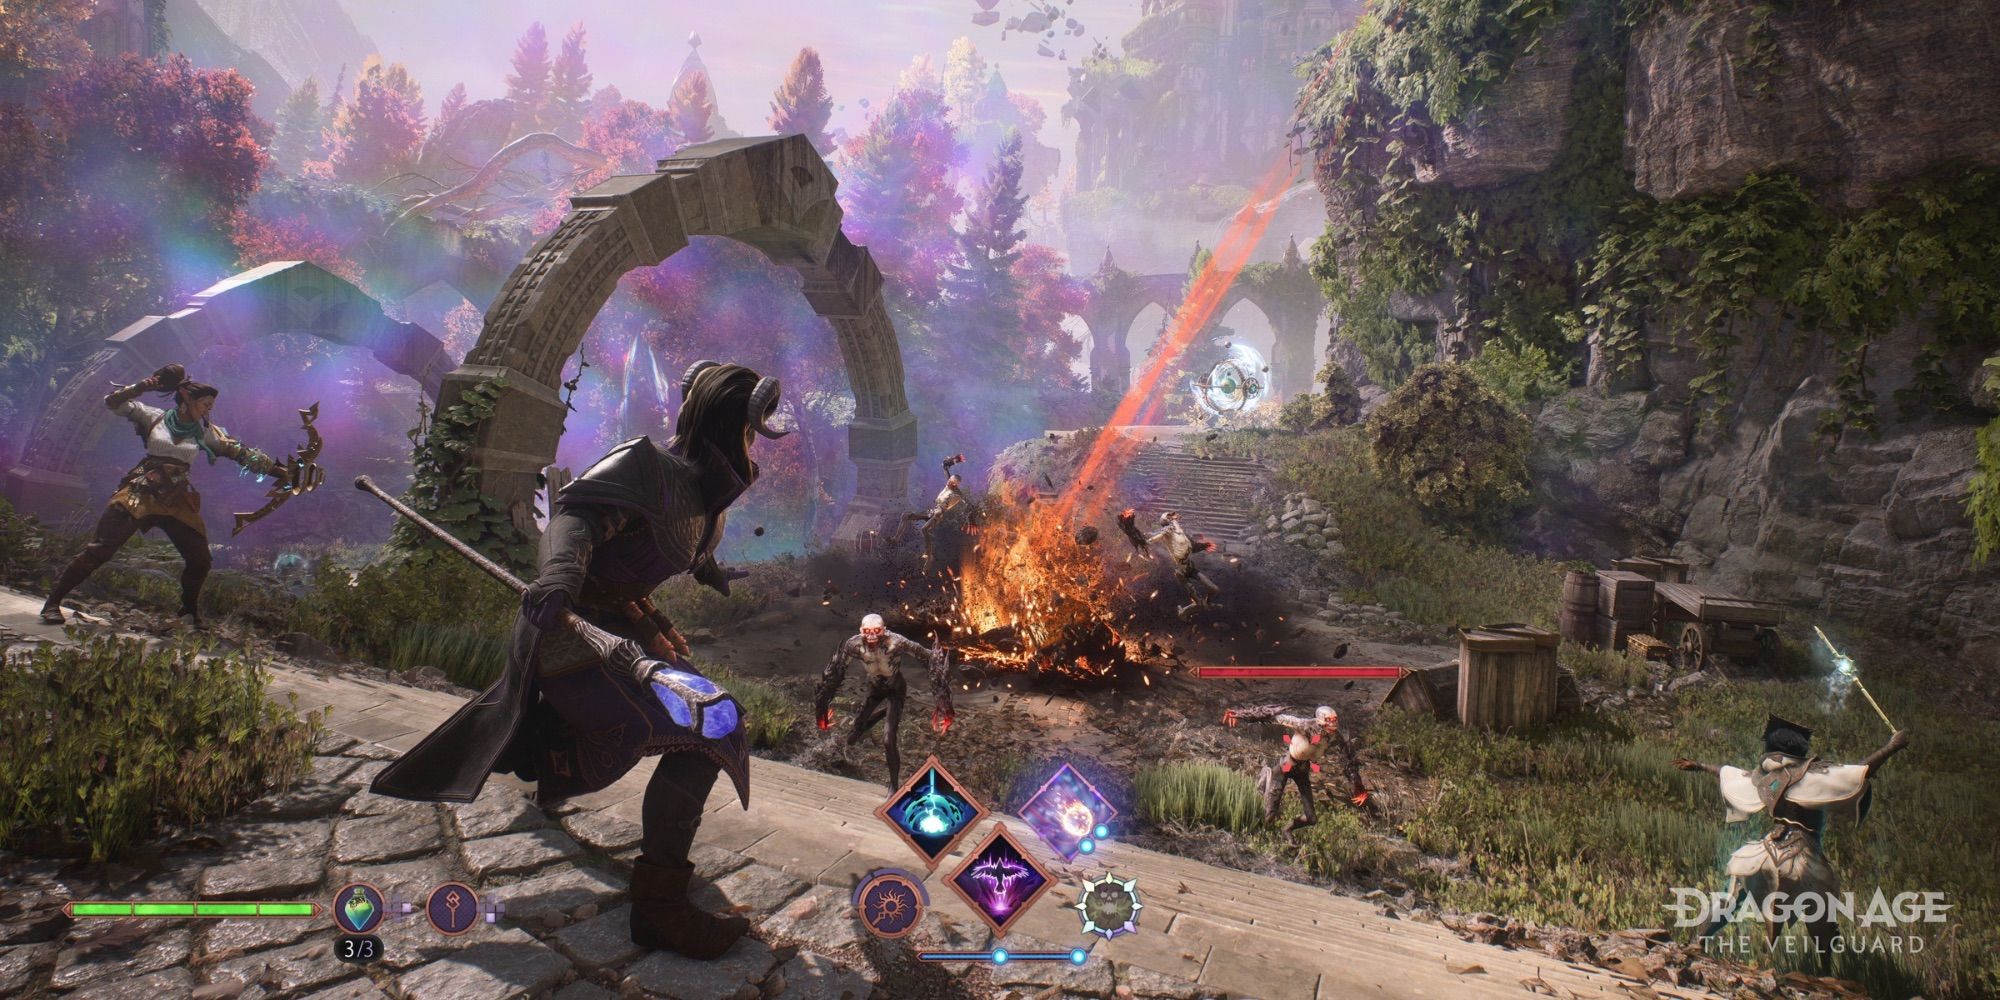 A player fighting as a mage in Dragon Age: The Veilguard